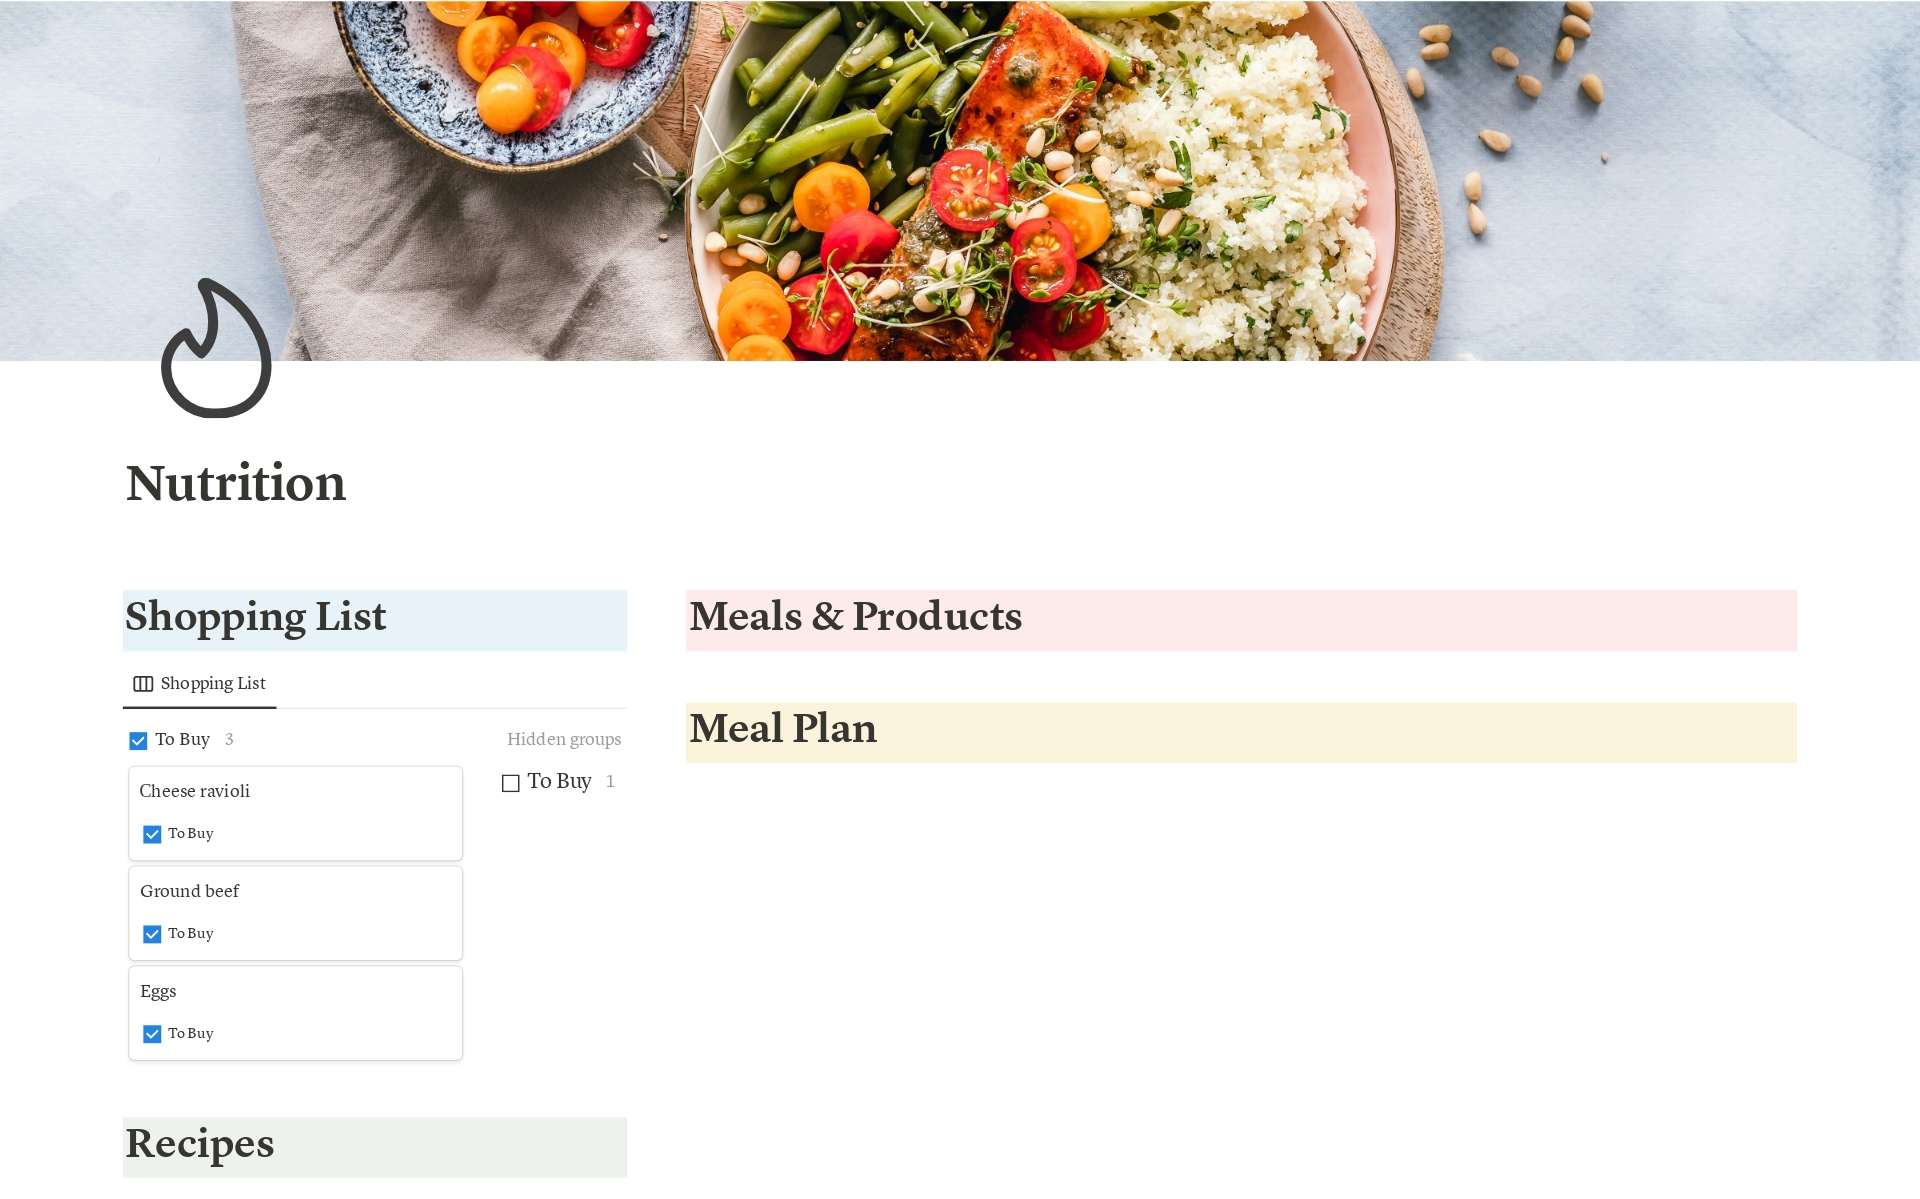 Template includes:

- Shopping list 

- Reciepes gallery

- Meal plan

- Grocery list